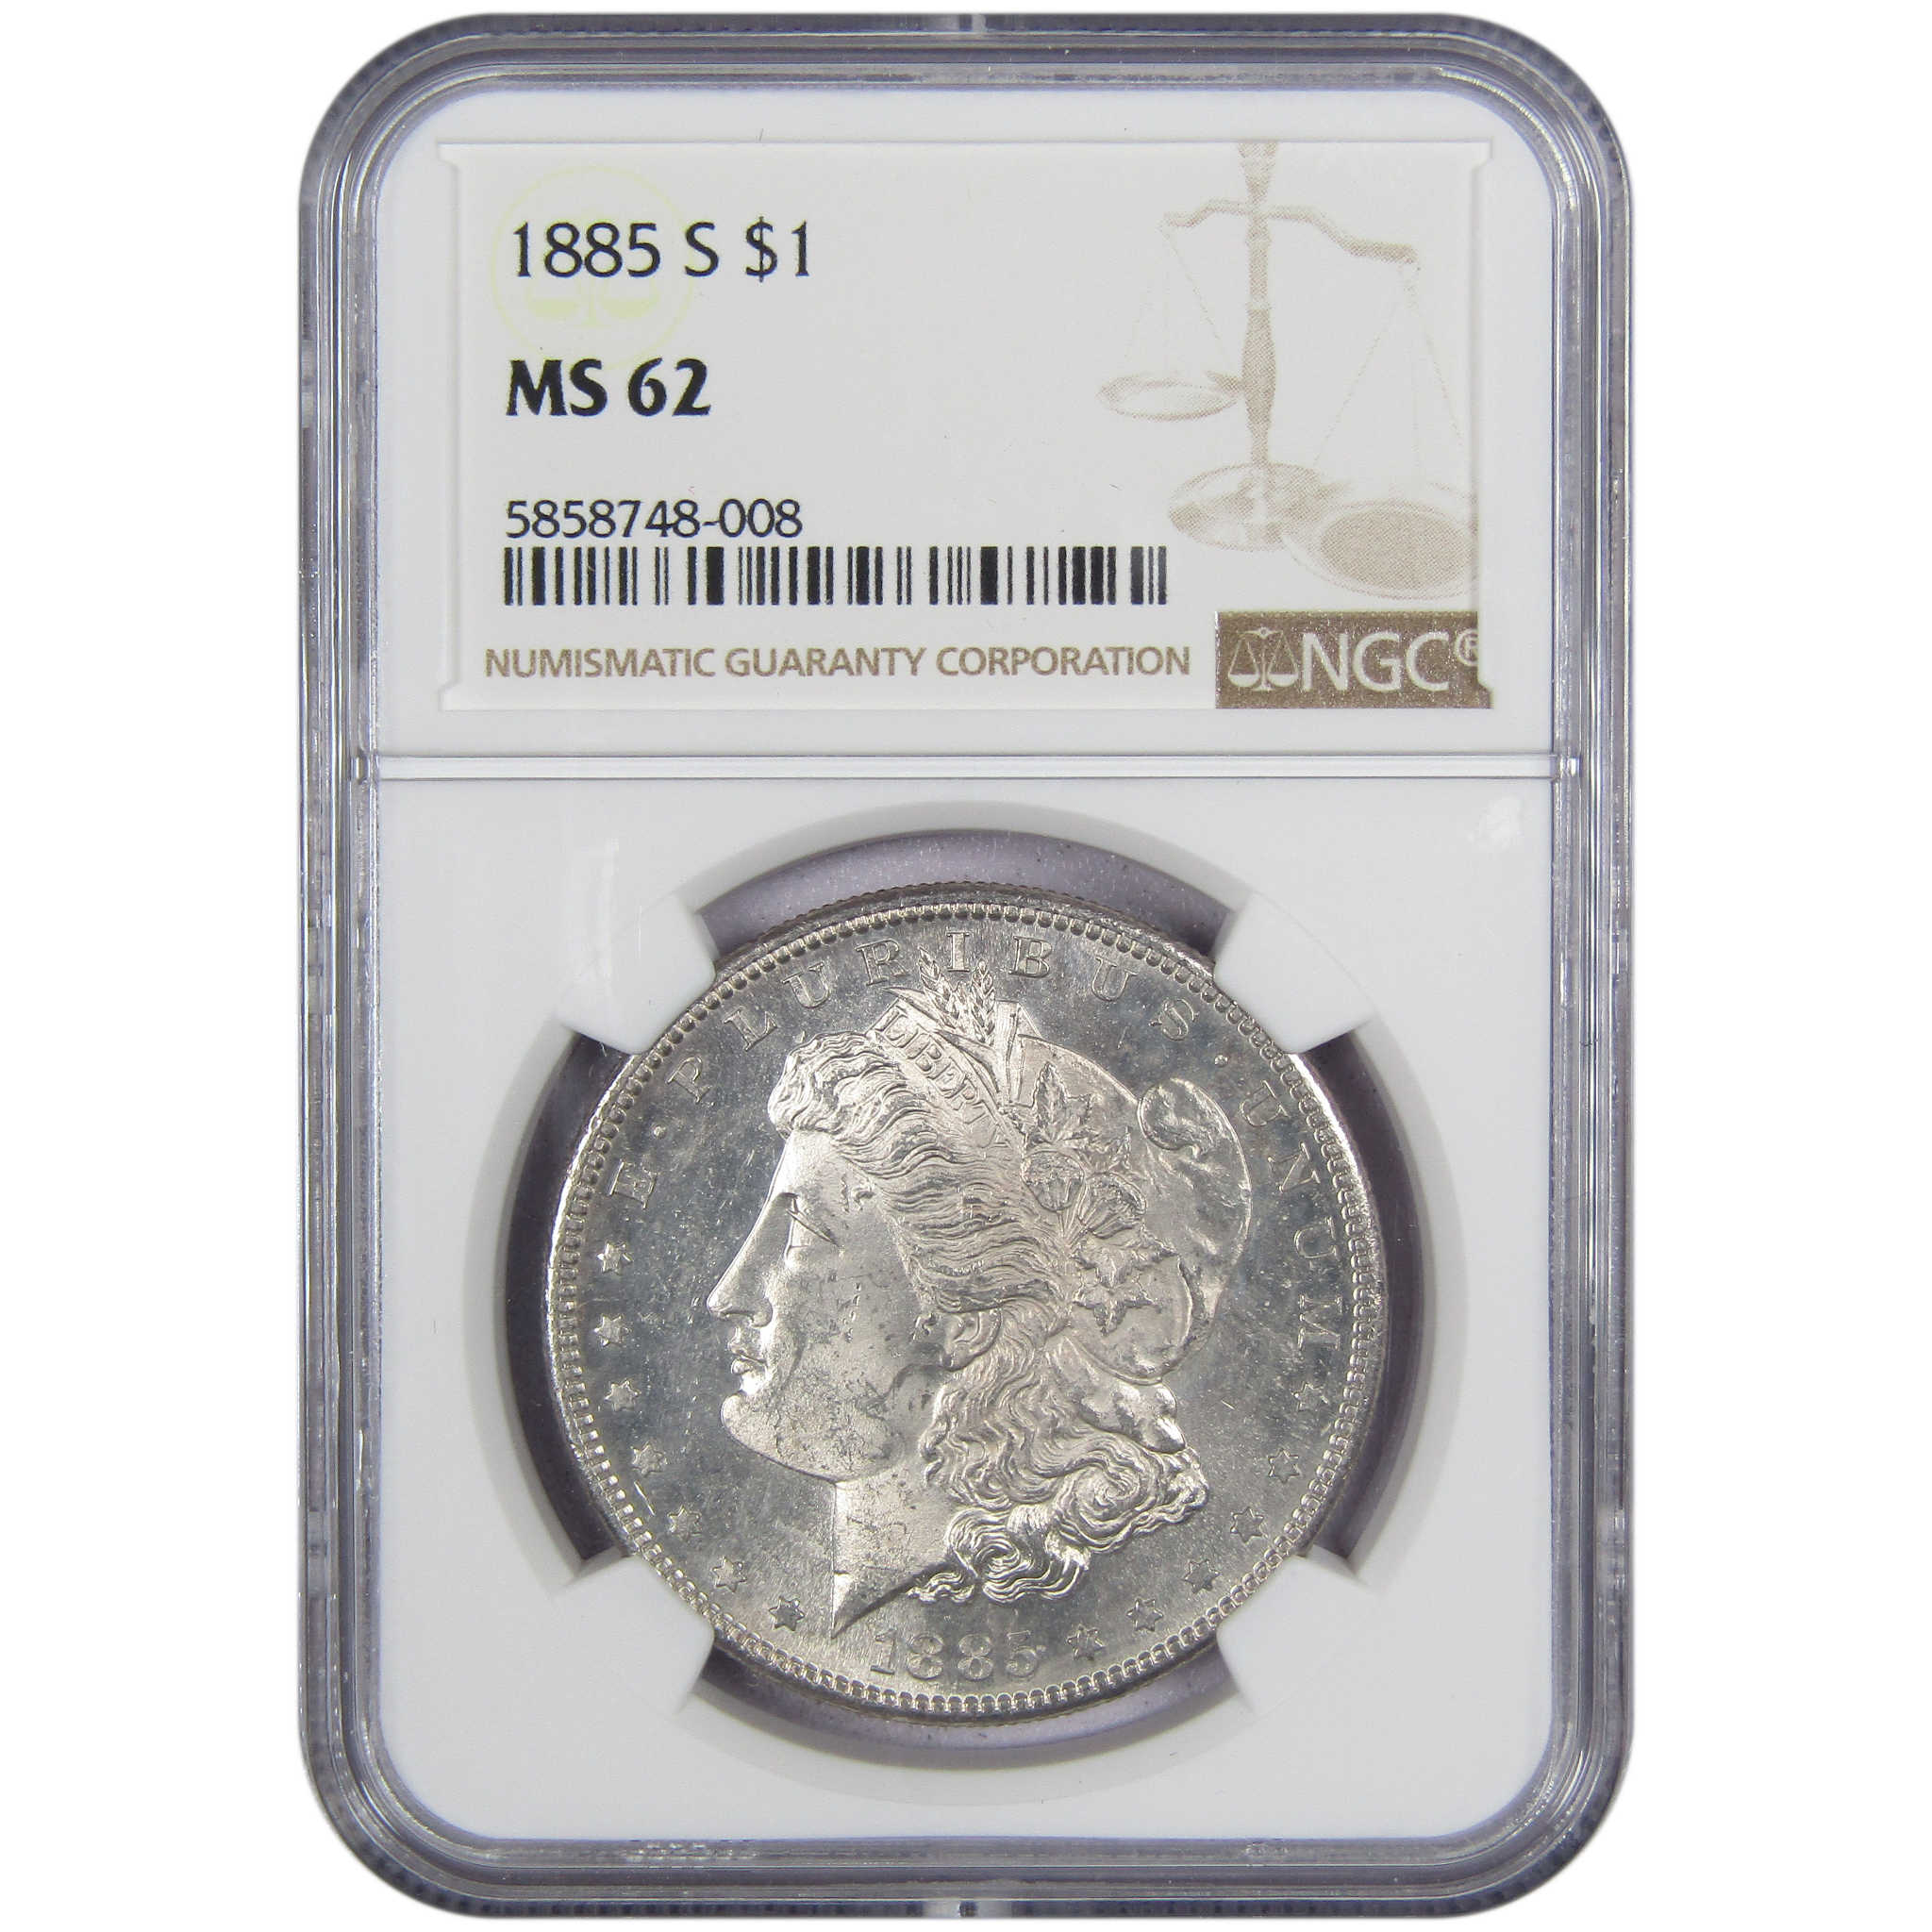 1885 S Morgan Dollar MS 62 NGC 90% Silver Uncirculated SKU:IPC5696 - Morgan coin - Morgan silver dollar - Morgan silver dollar for sale - Profile Coins &amp; Collectibles